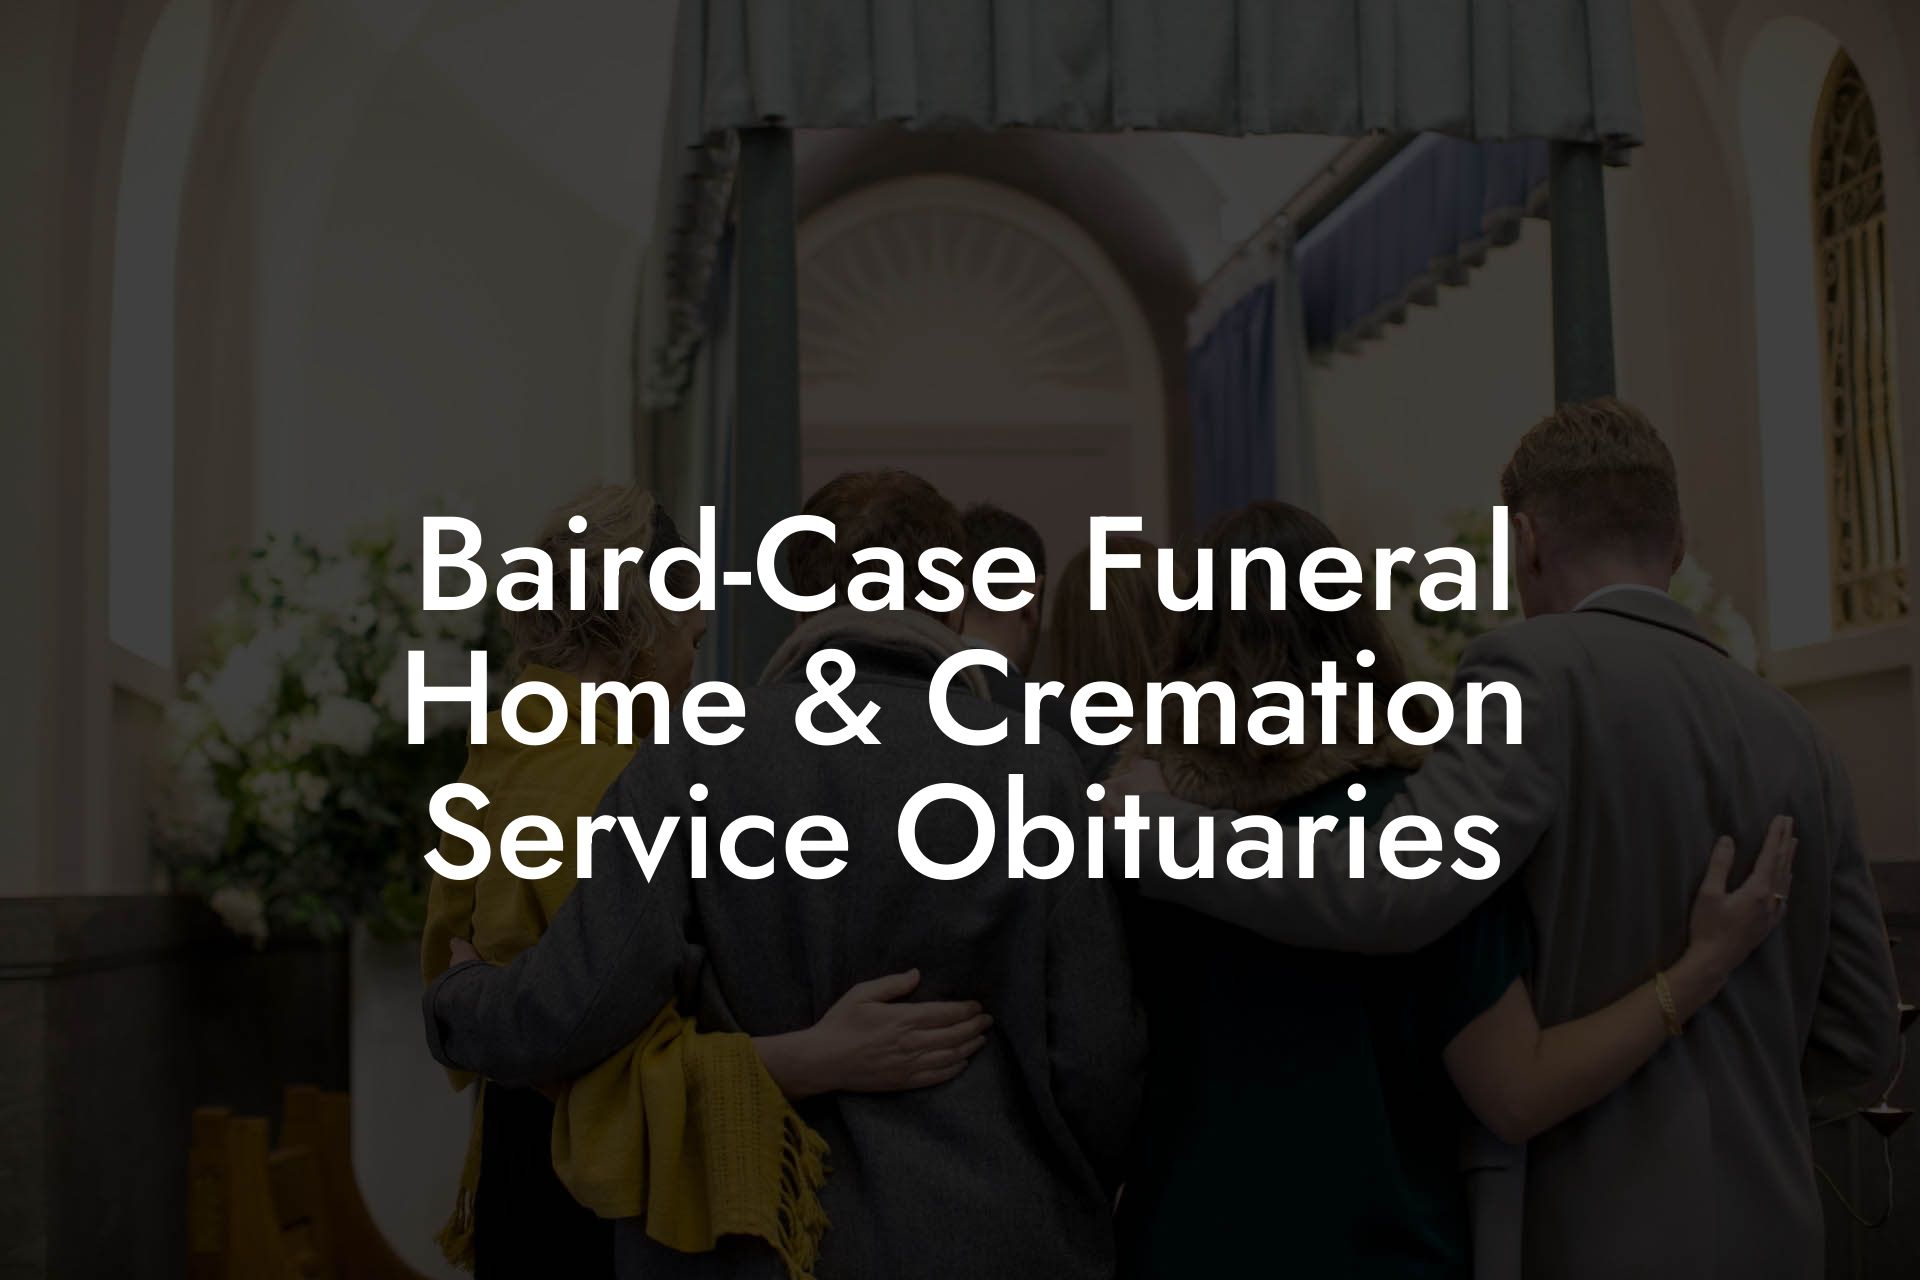 Baird-Case Funeral Home & Cremation Service Obituaries